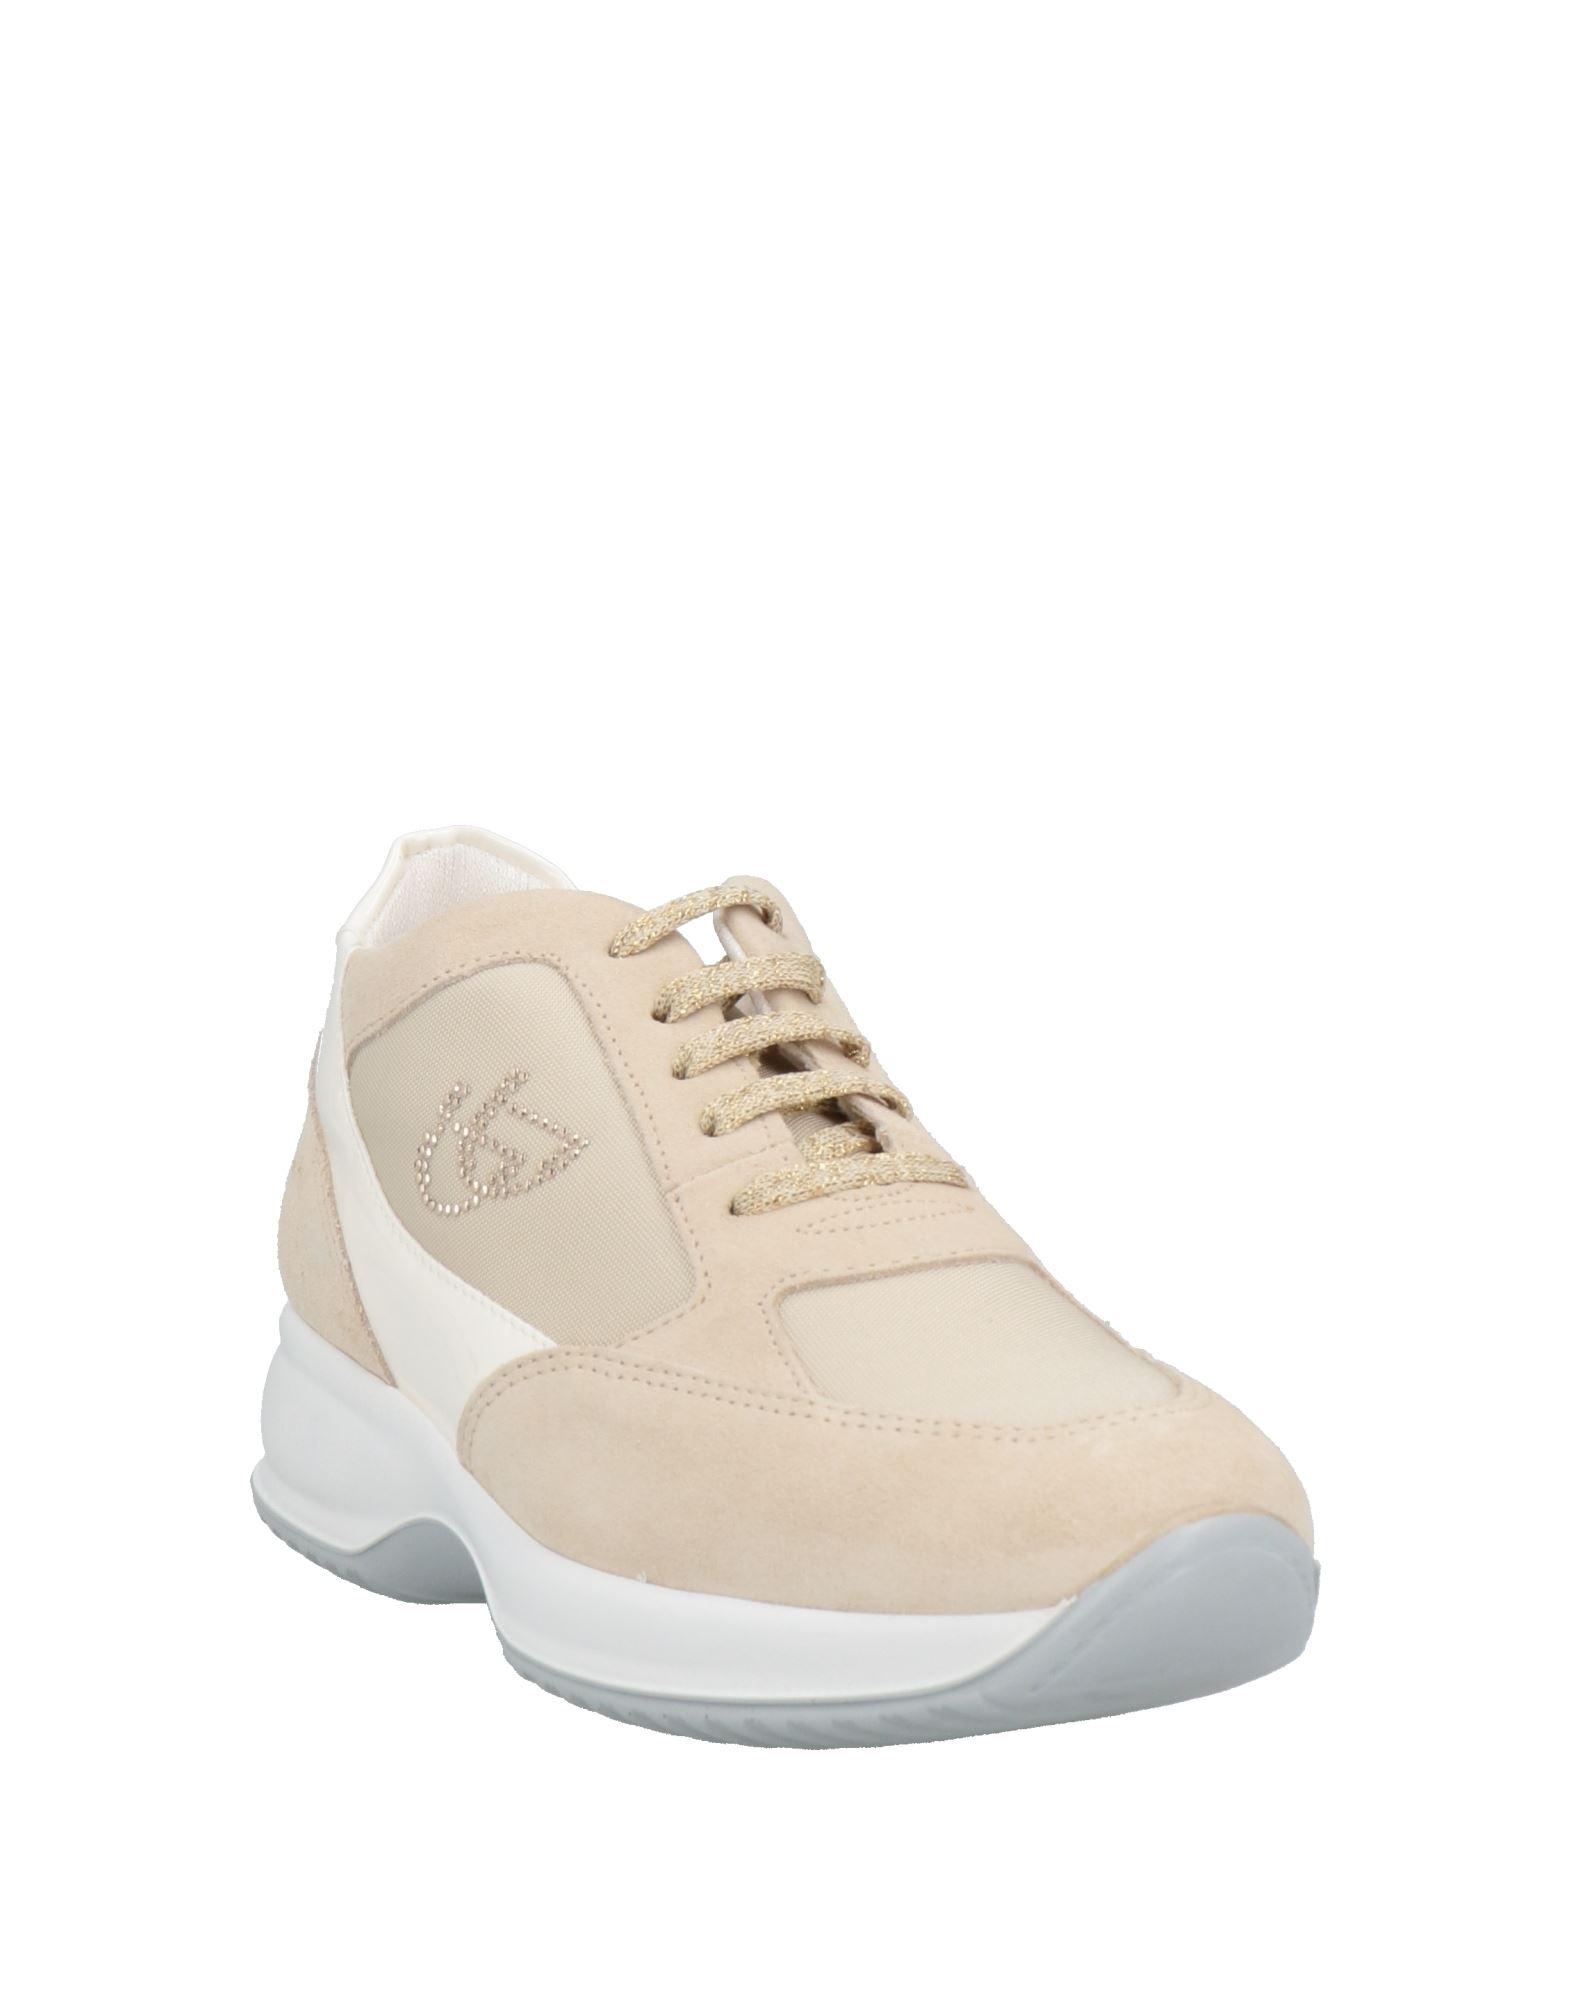 Blu Byblos Trainers in White | Lyst